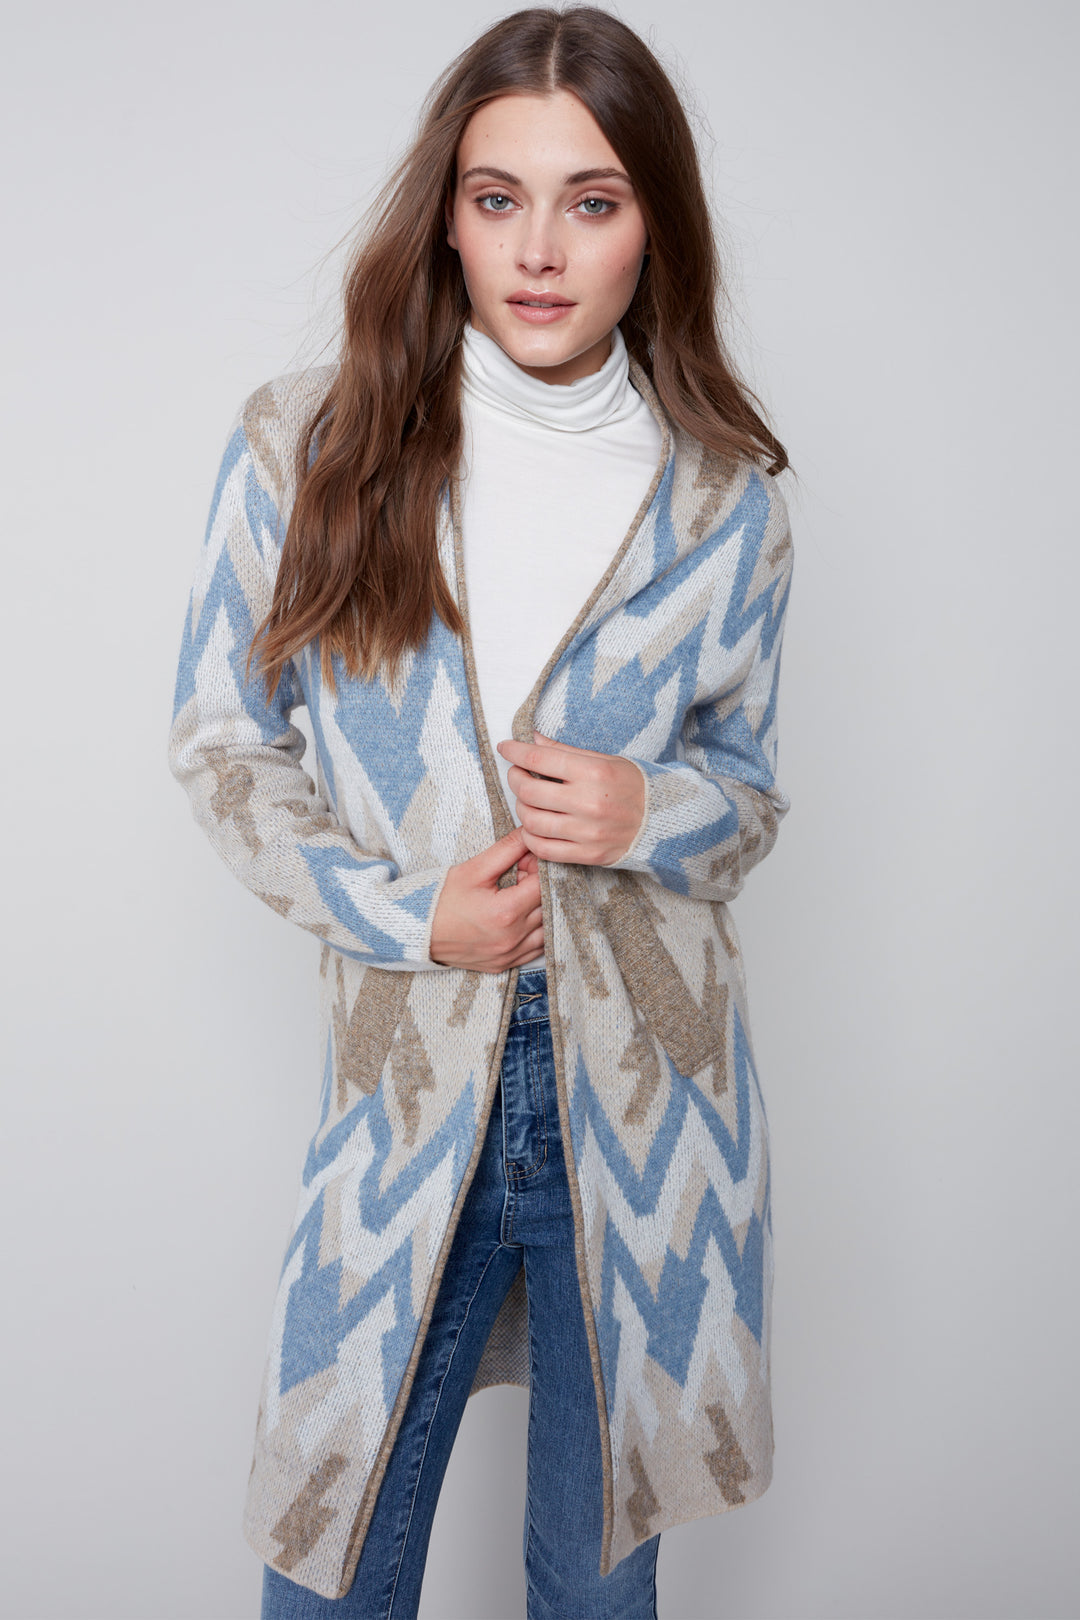 Step up your style this Fall with the Zigzag Print Cardigan, made from long Jacquard knit and featuring a fitted open cardigan with pocket. This versatile cardigan is accentuated with a light look mixed with soft autum colours, so you can make a fashion statement no matter where you are.